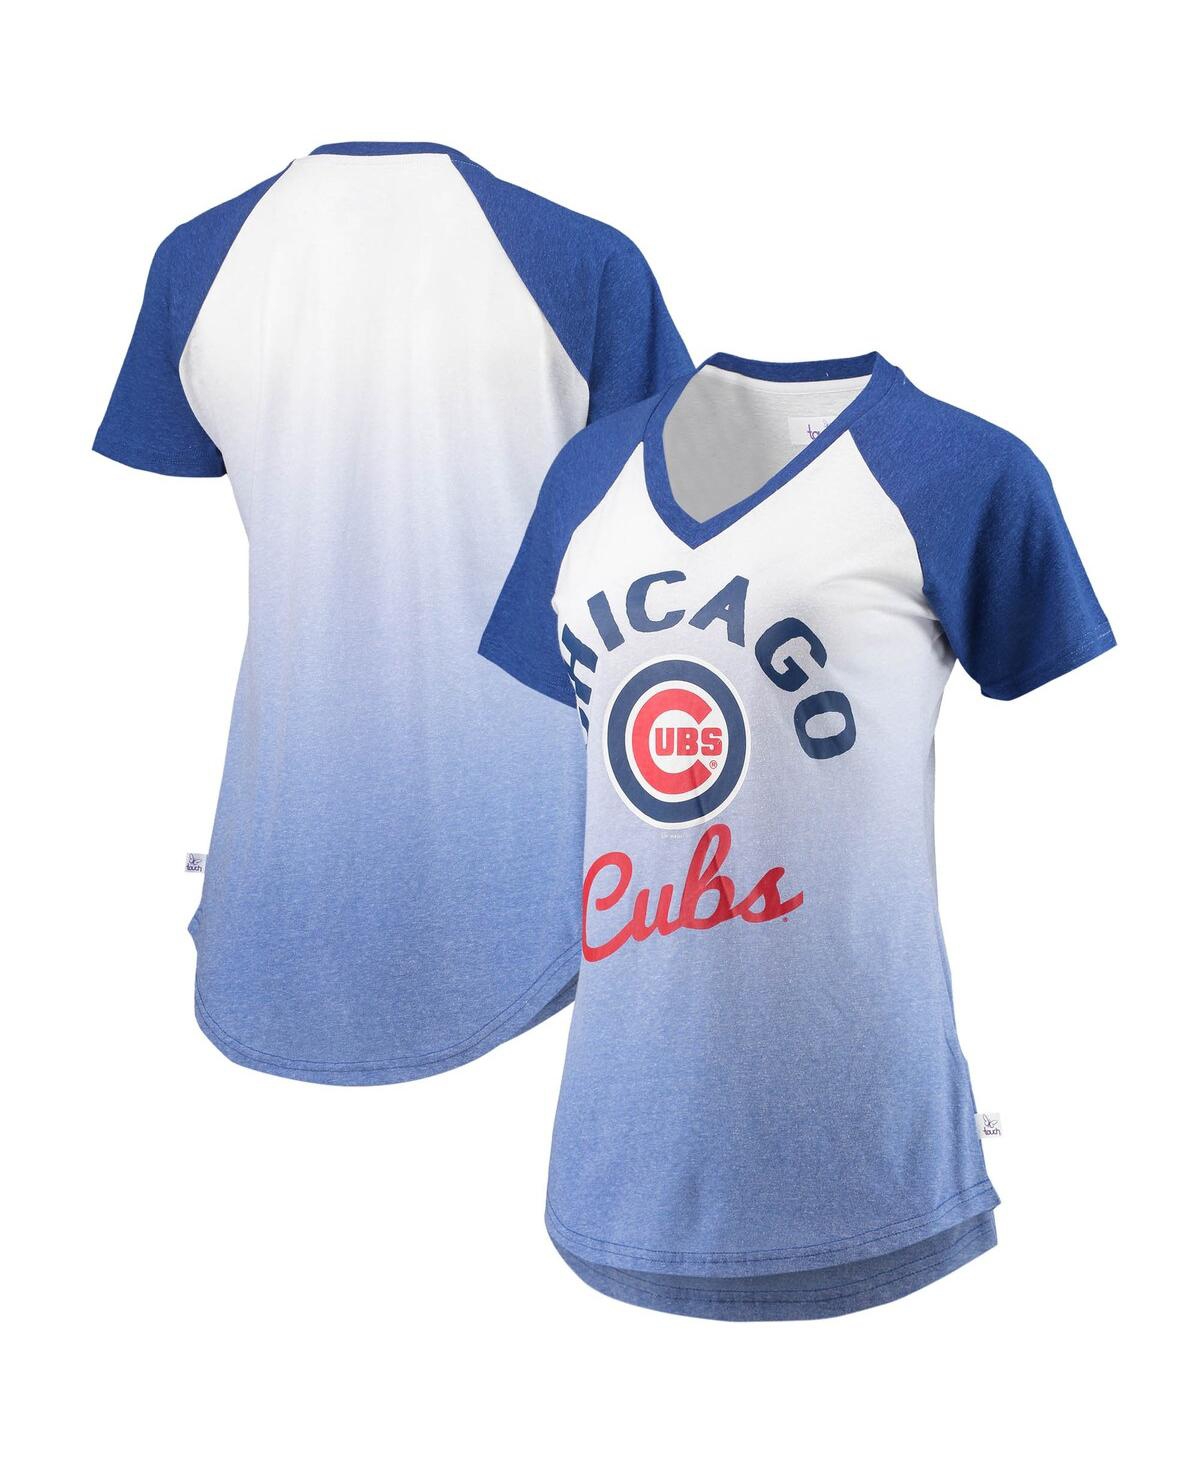 Touché Women's Royal And White Chicago Cubs Shortstop Ombre Raglan V-neck T-shirt In Royal,white